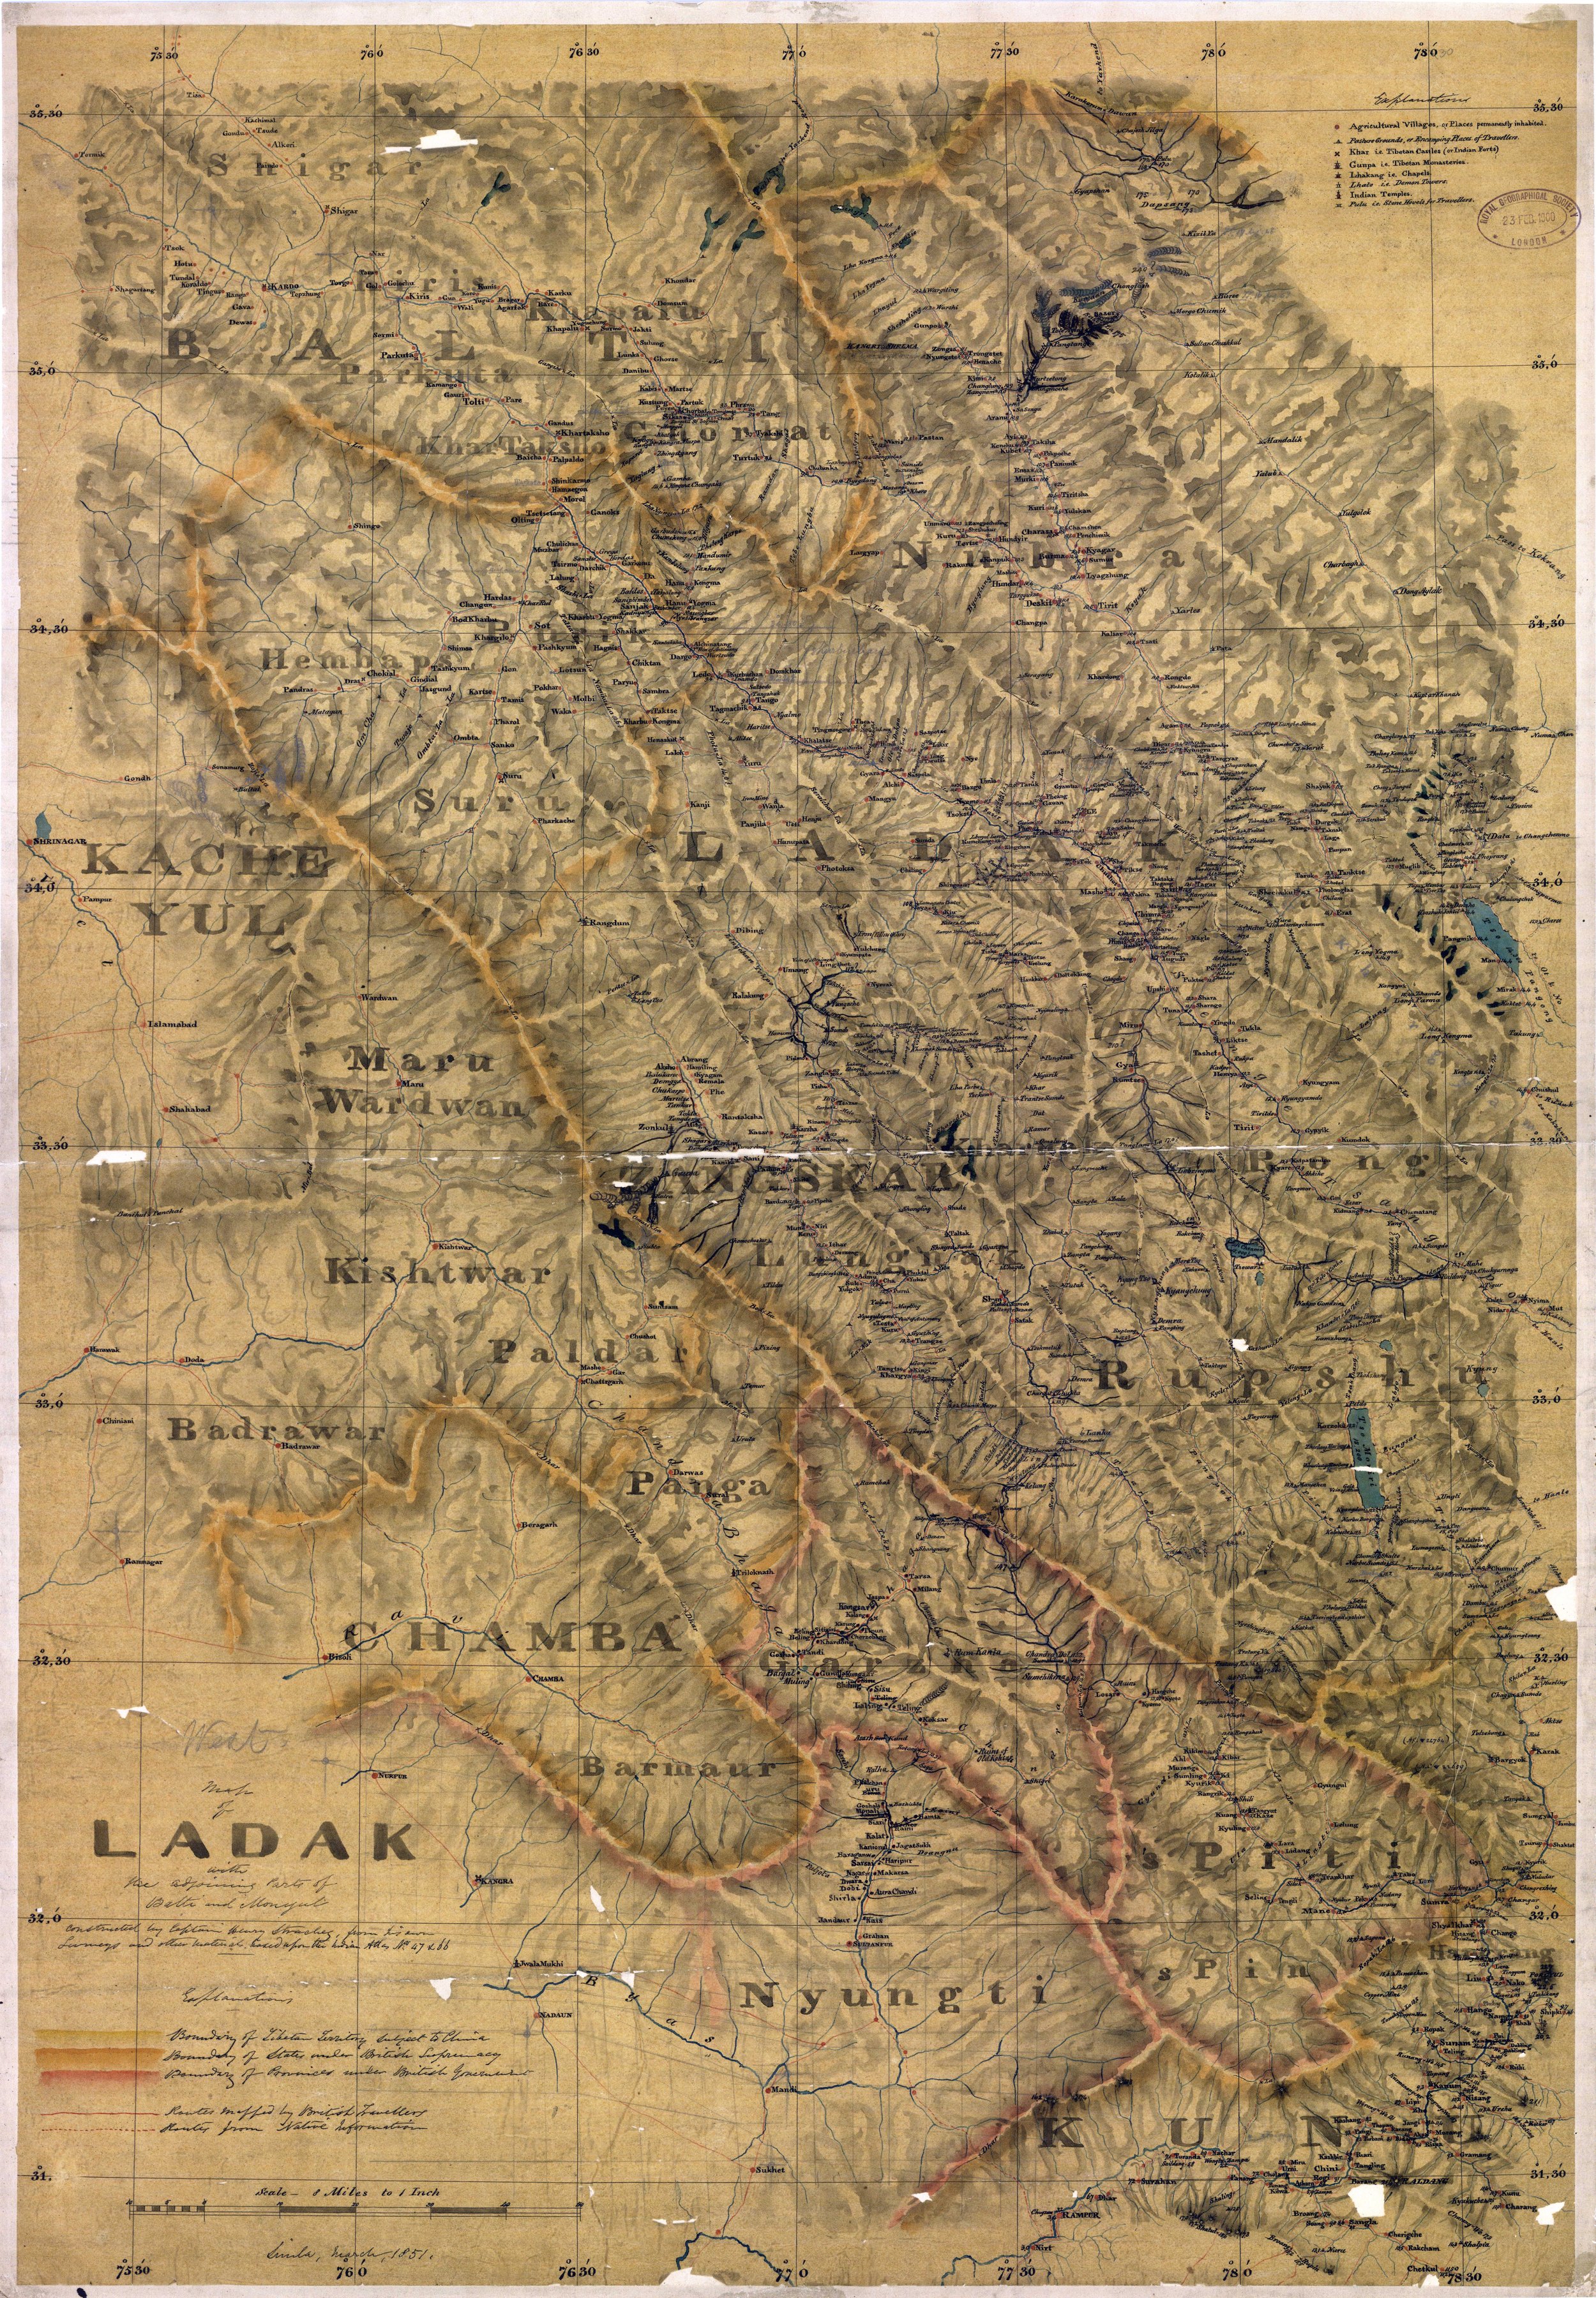 1851 Map of Ladak West with parts of Balti and Monyul by Strachey